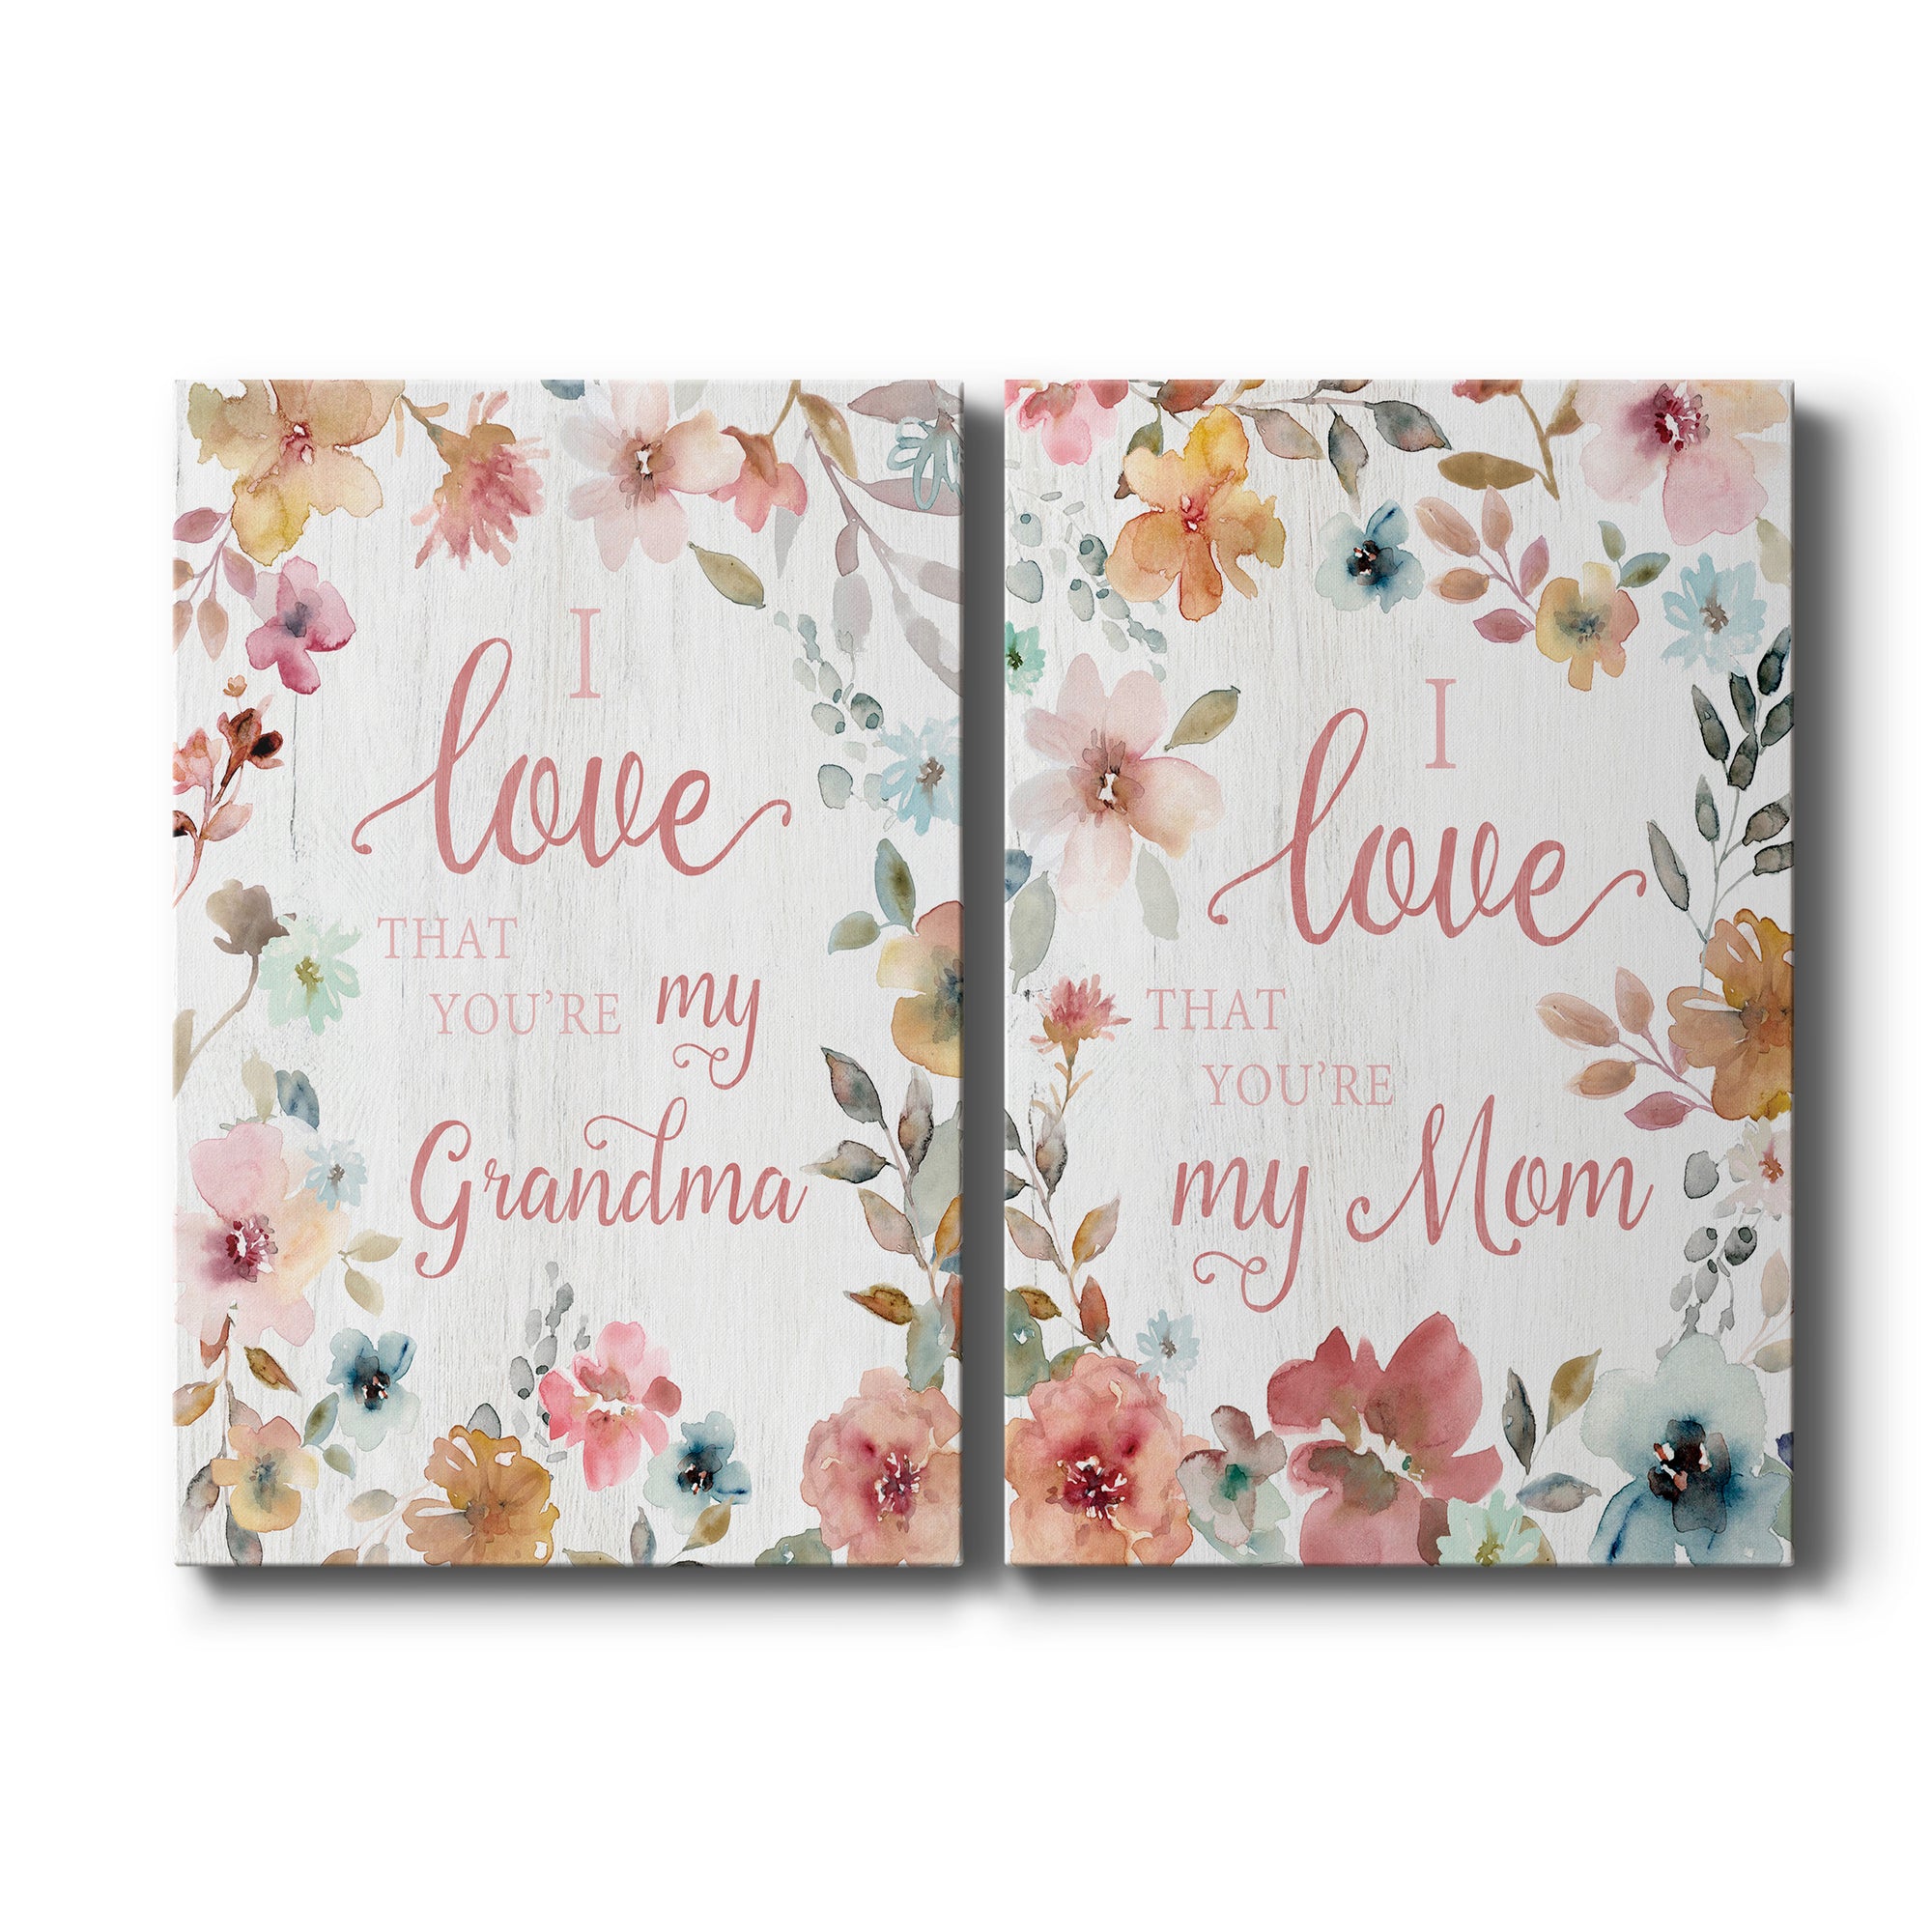 Love Grandma Premium Gallery Wrapped Canvas - Ready to Hang - Set of 2 - 8 x 12 Each